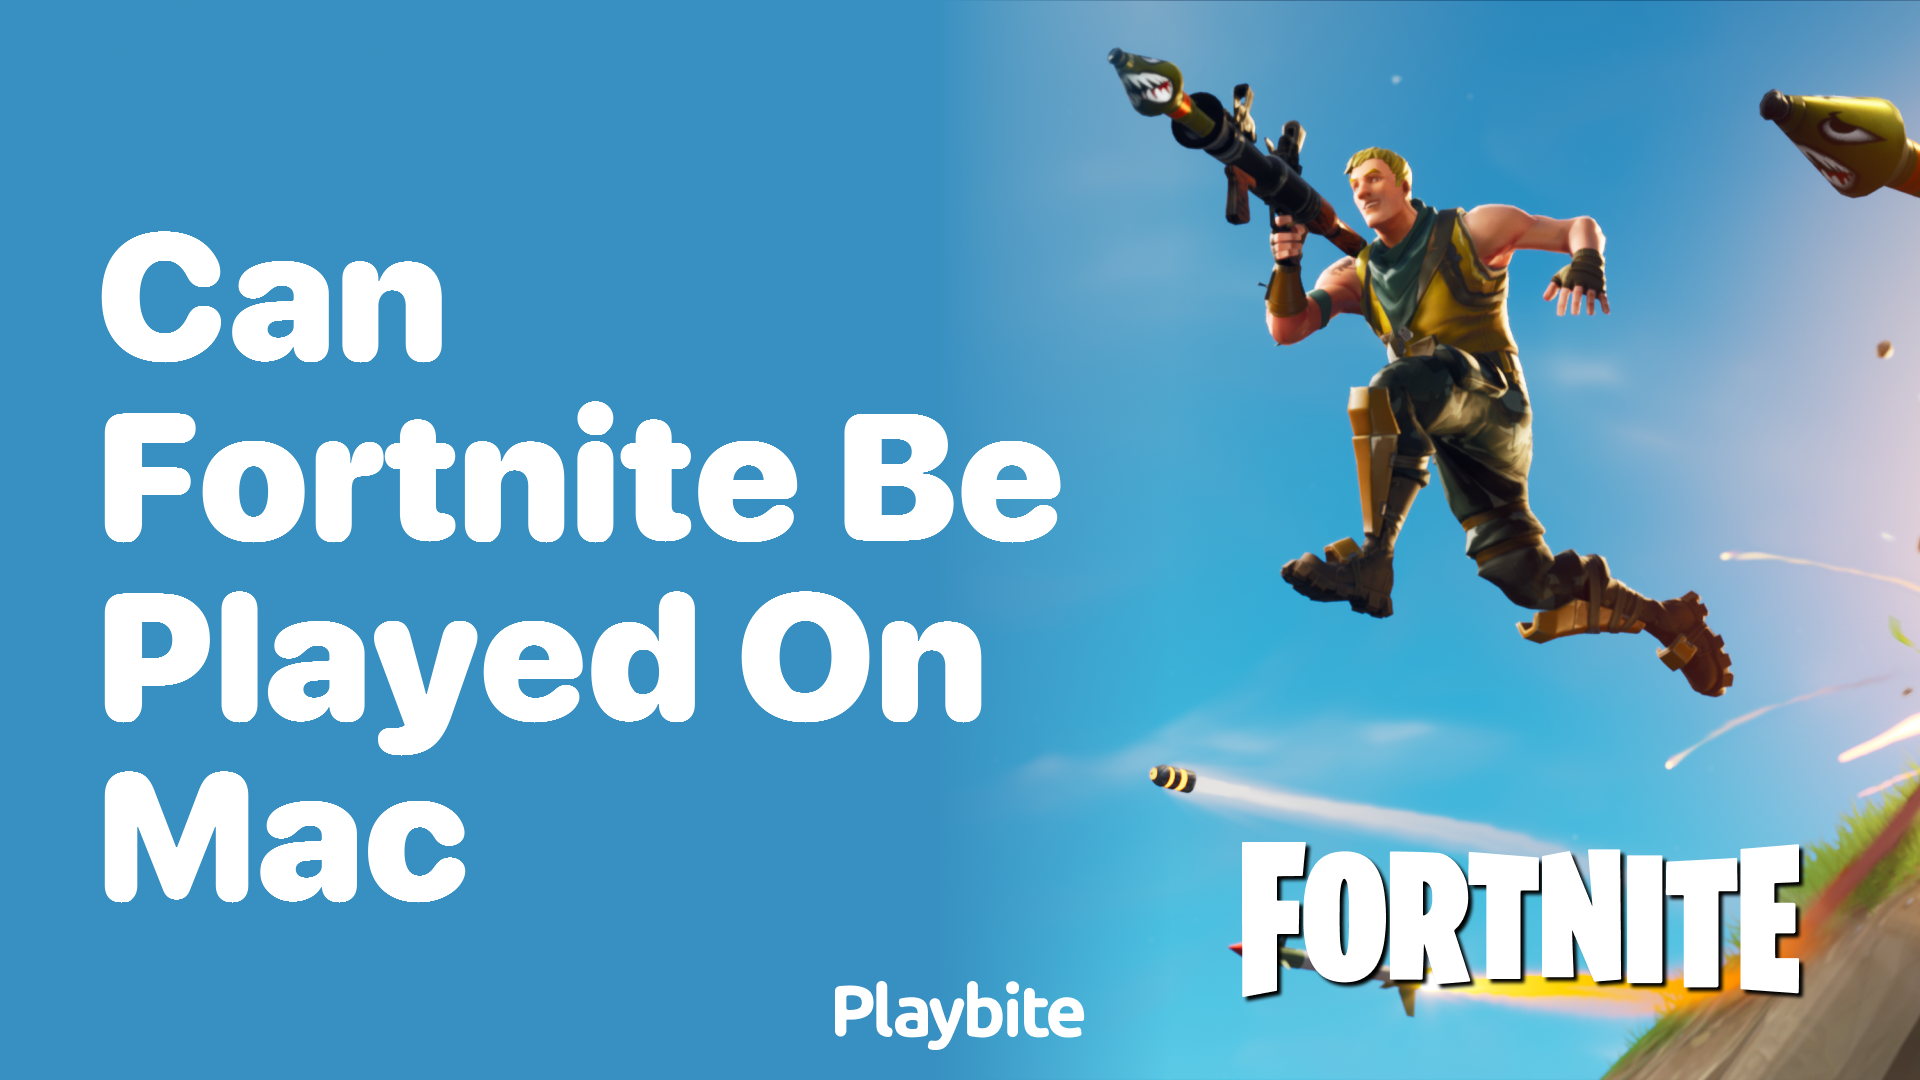 Can Fortnite Be Played on Mac?